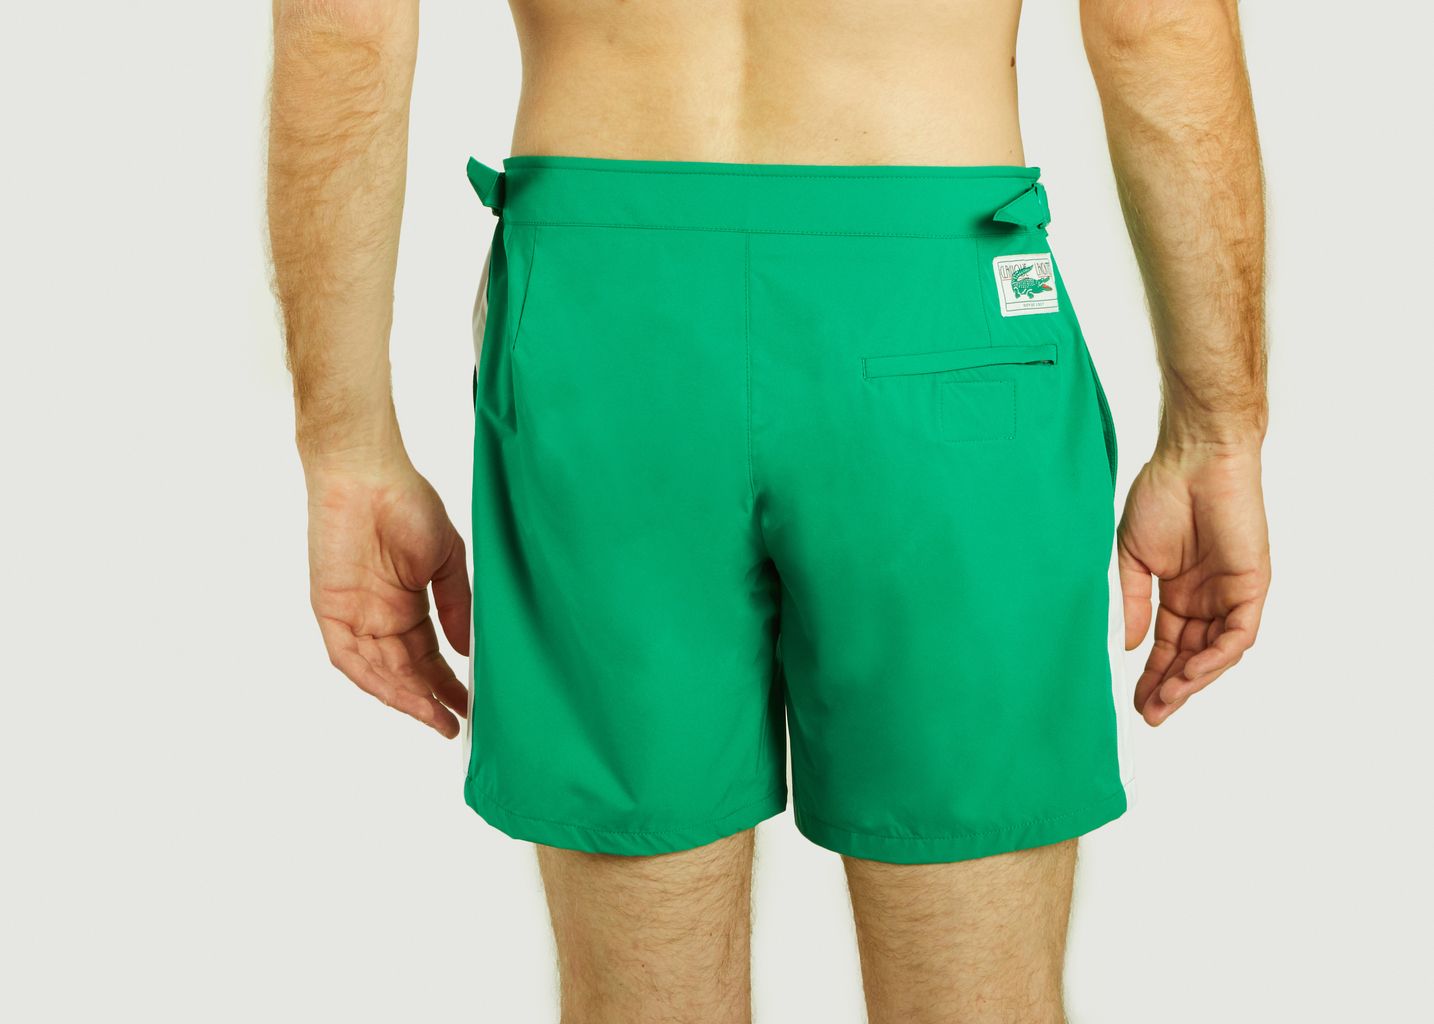 Lightweight swim shorts with contrasting stripes - Lacoste